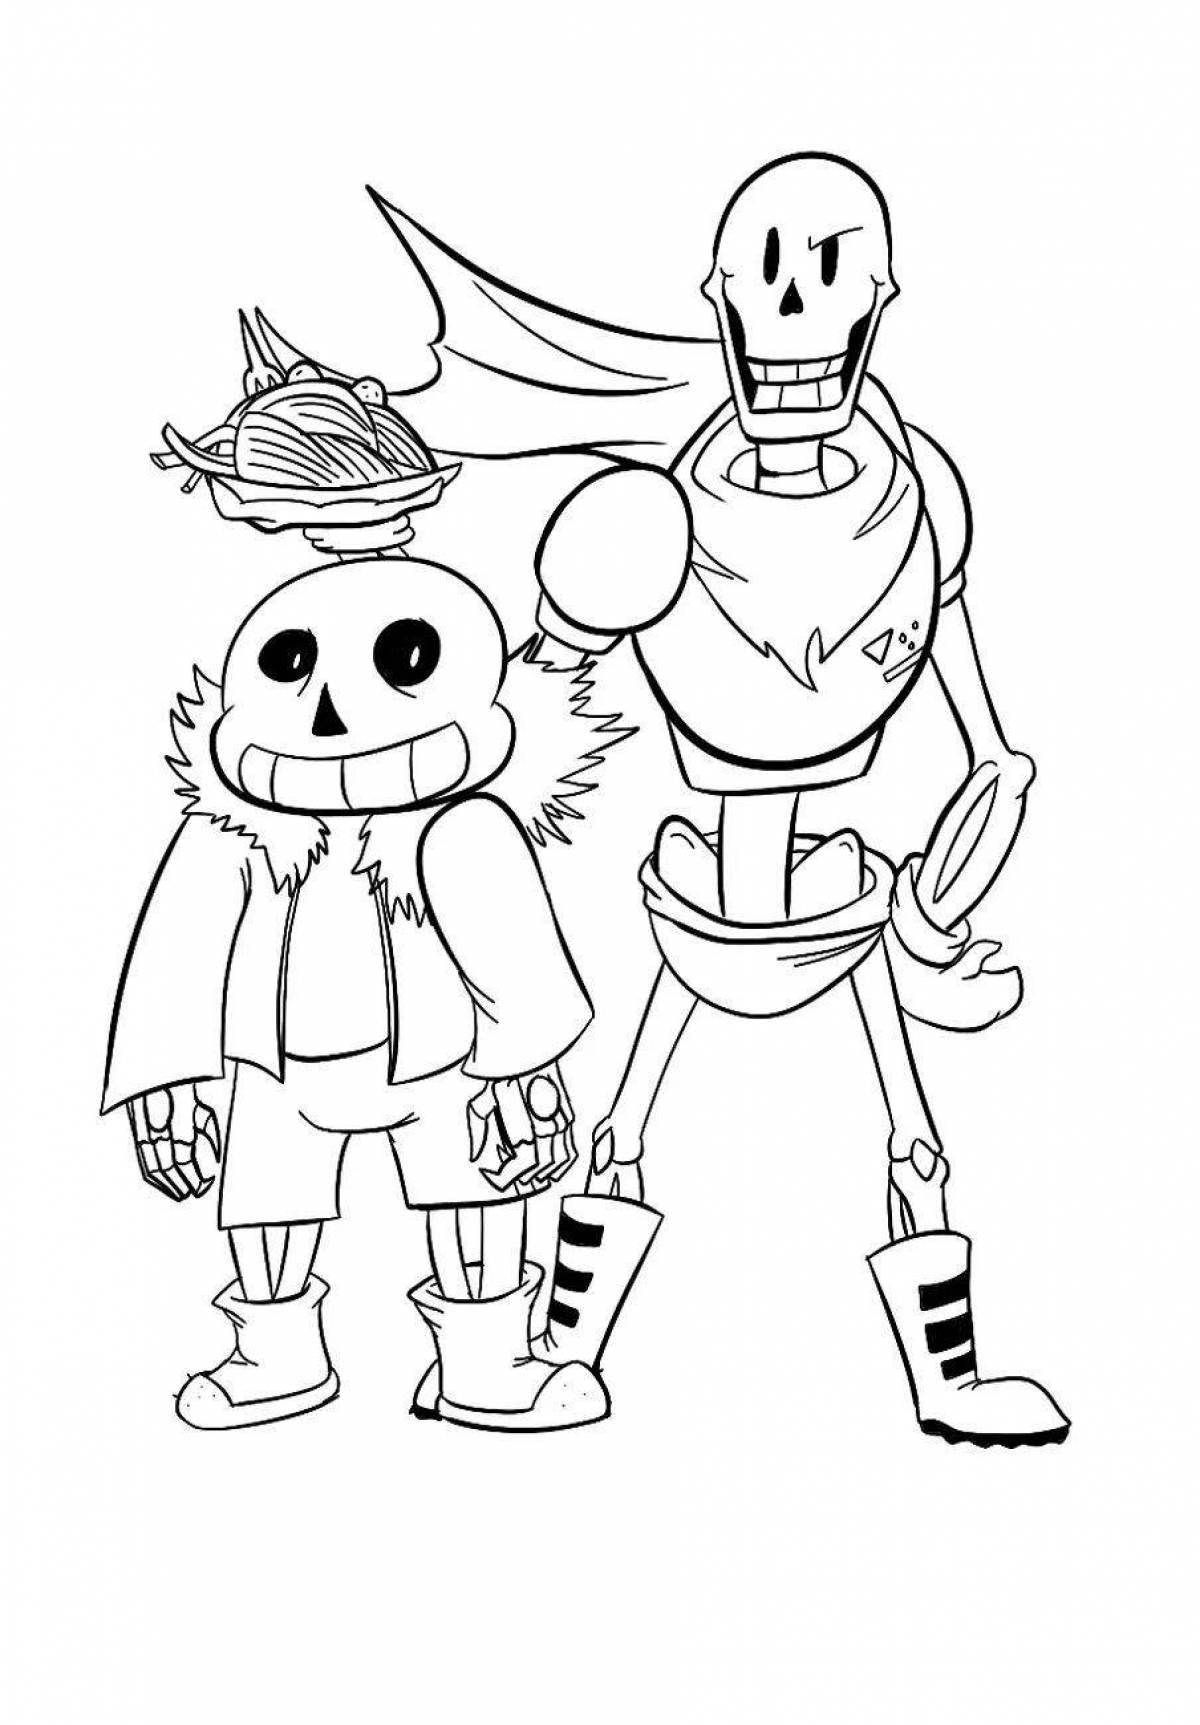 Charming undertale by number coloring book